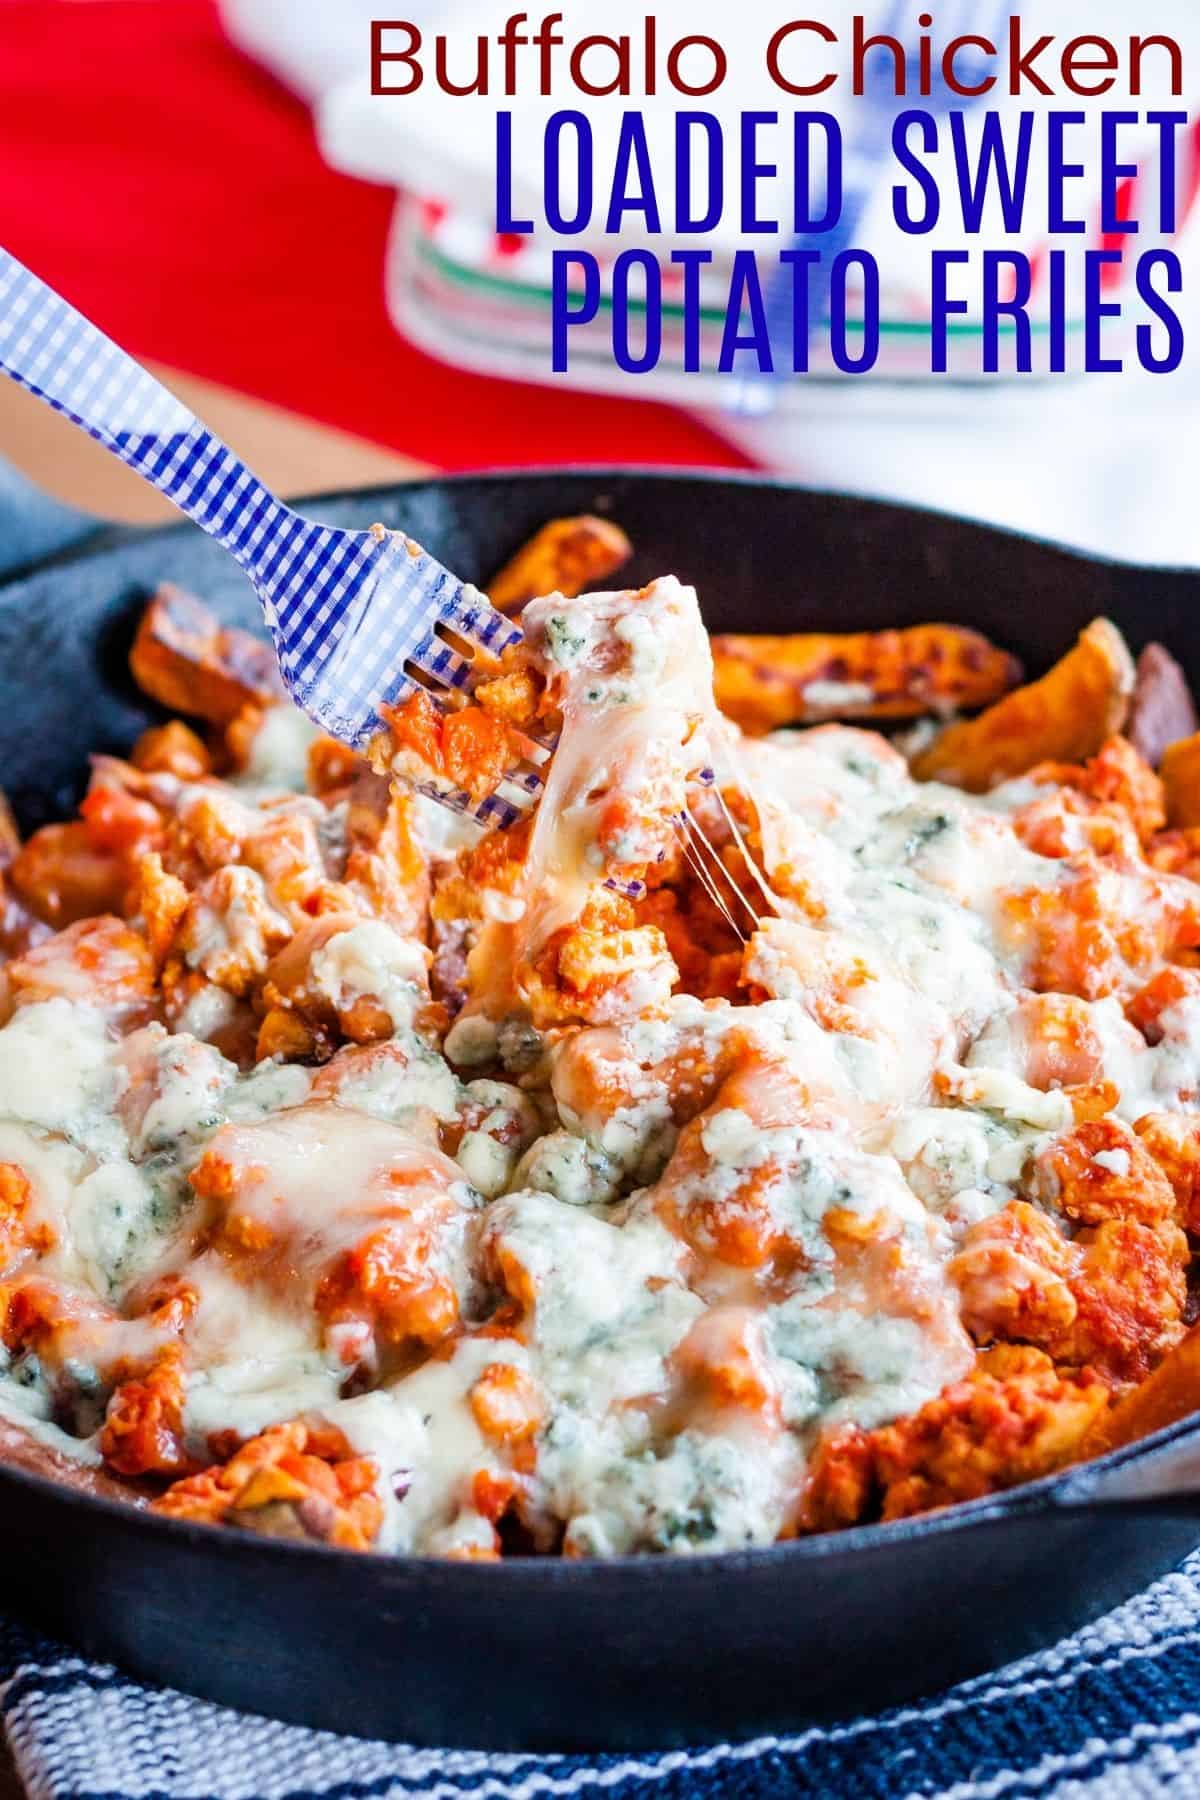 Buffalo Chicken Loaded Baked Sweet Potato Fries - one of the Top 10 Most Popular Savory Recipes of 2015 on cupcakesandkalechips.com